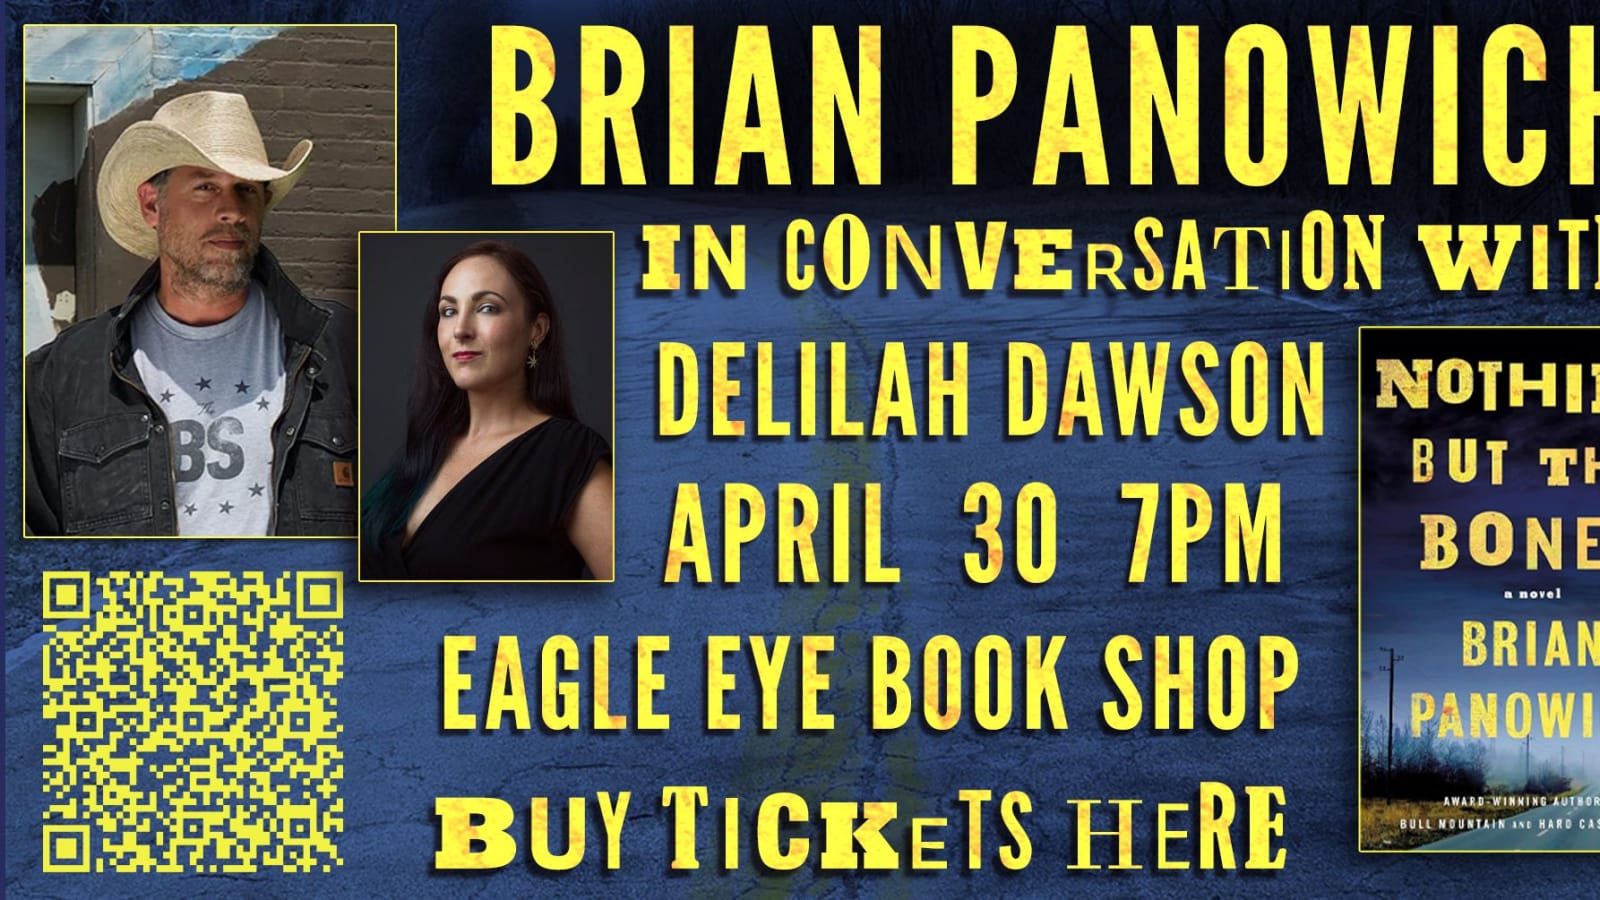 Brian Panowich in conversation with Delilah Dawson